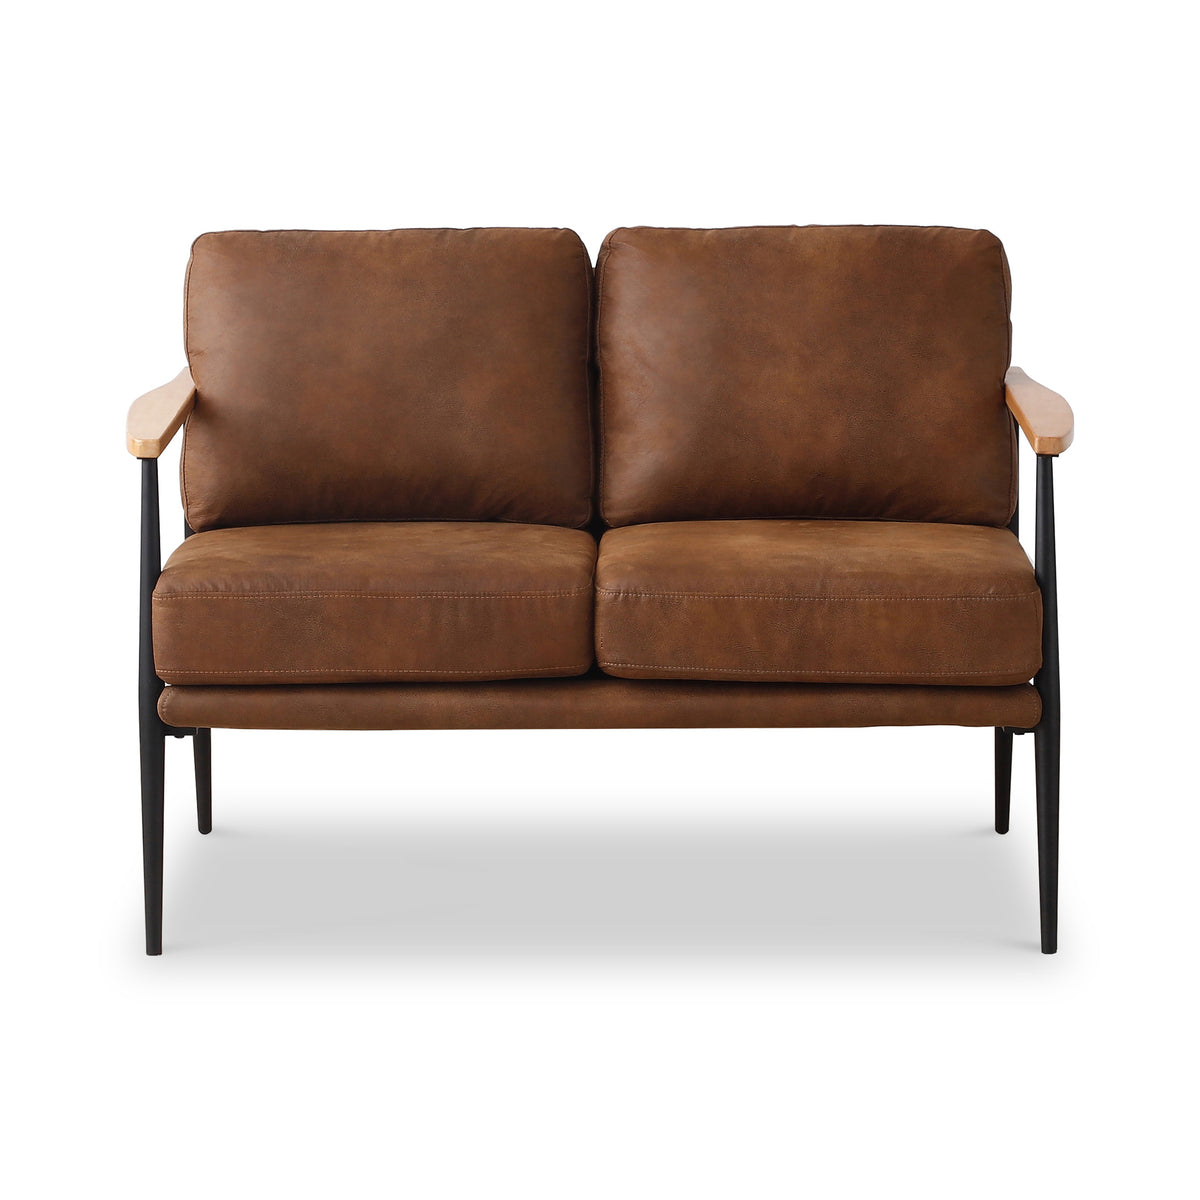 Harlem Brown Faux Leather 2 Seater Sofa from Roseland Furniture